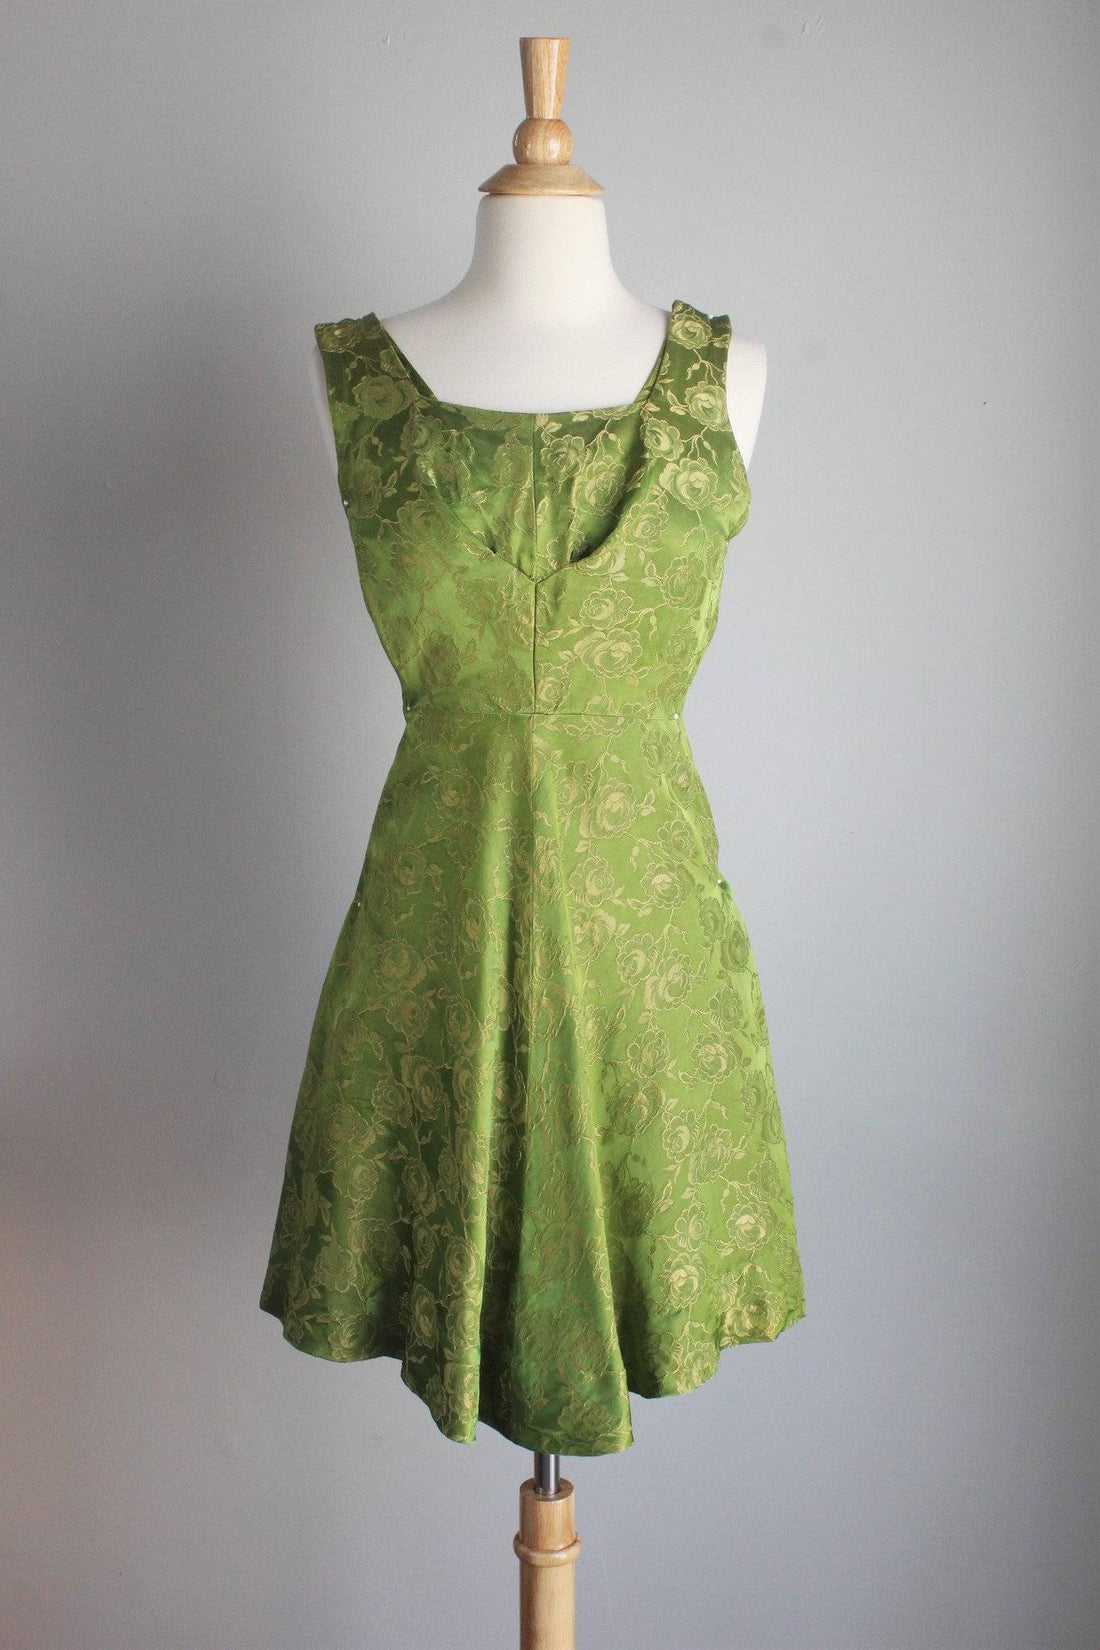 Vintage 1940s Green Damask Fit and Flare Party Dress – Toadstool Farm ...